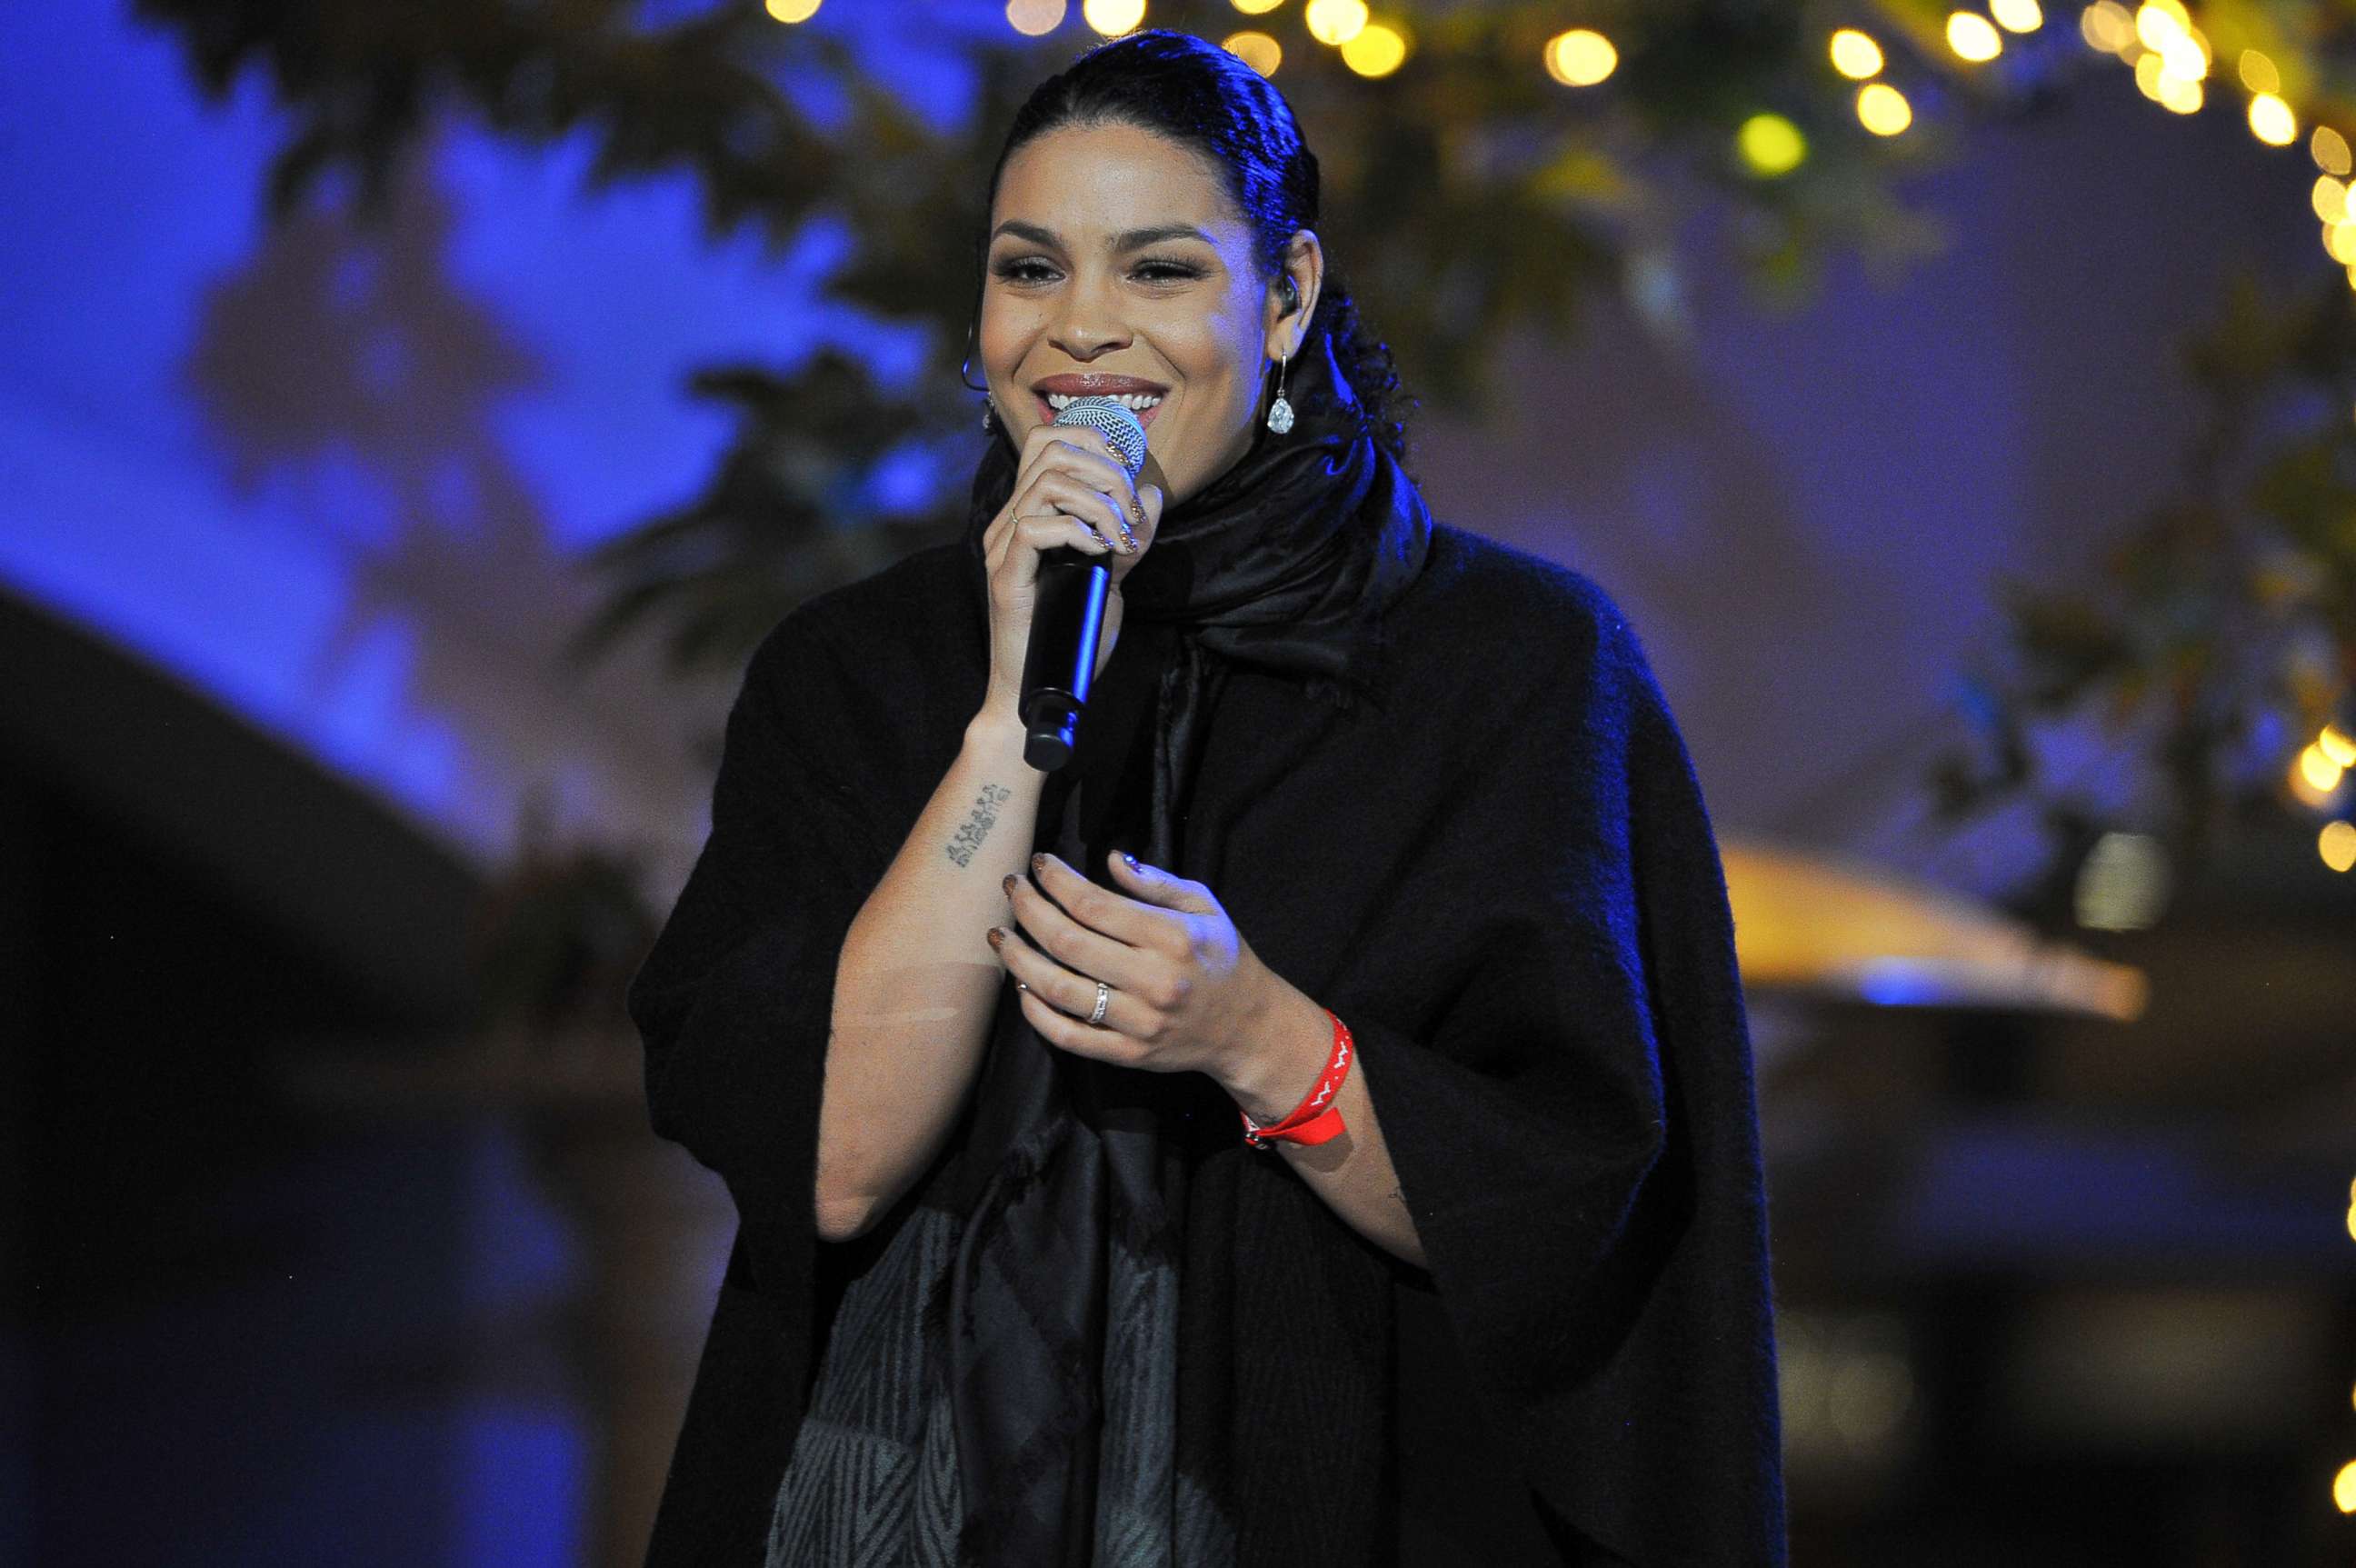 PHOTO: Jordin Sparks performs during A California Christmas at The Grove Presented by Citi, Nov. 12, 2017 in Los Angeles.